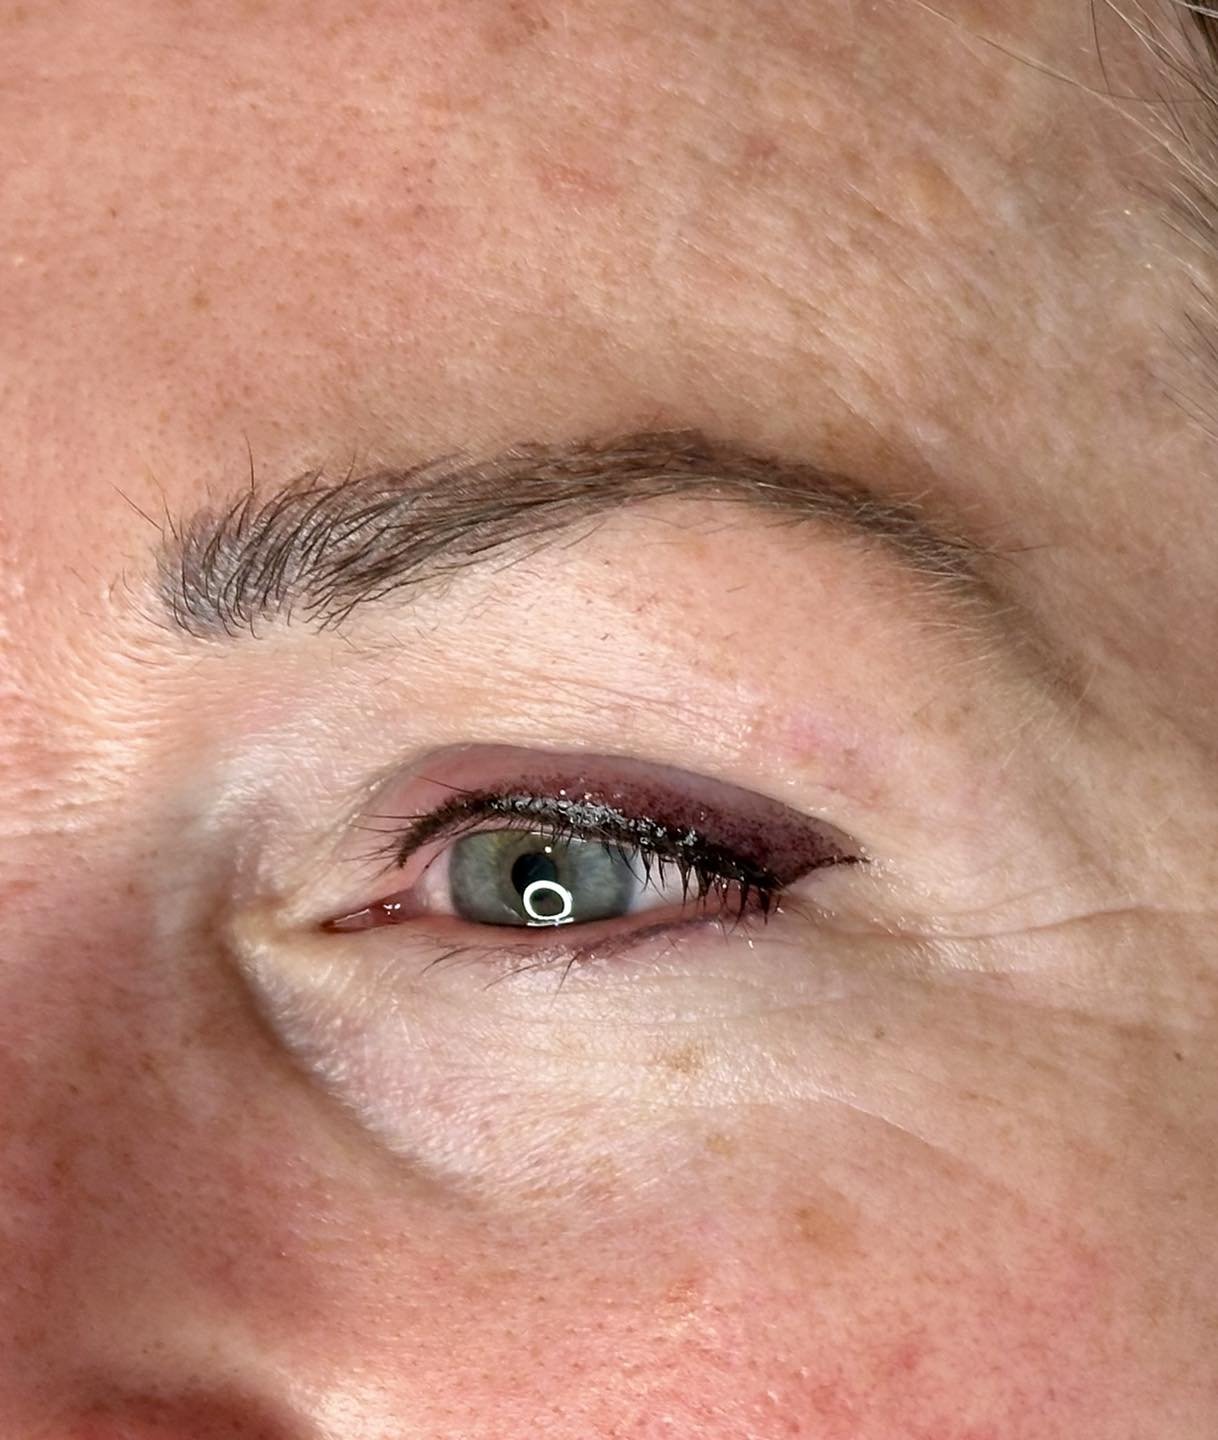 The permanent makeup eyeliner journey might seem daunting, but the stunning results speak for themselves!!! This is a soft smudge eyeliner look done by Christina!! Swipe to see the magic and book your consultation with Christina today to unlock your 